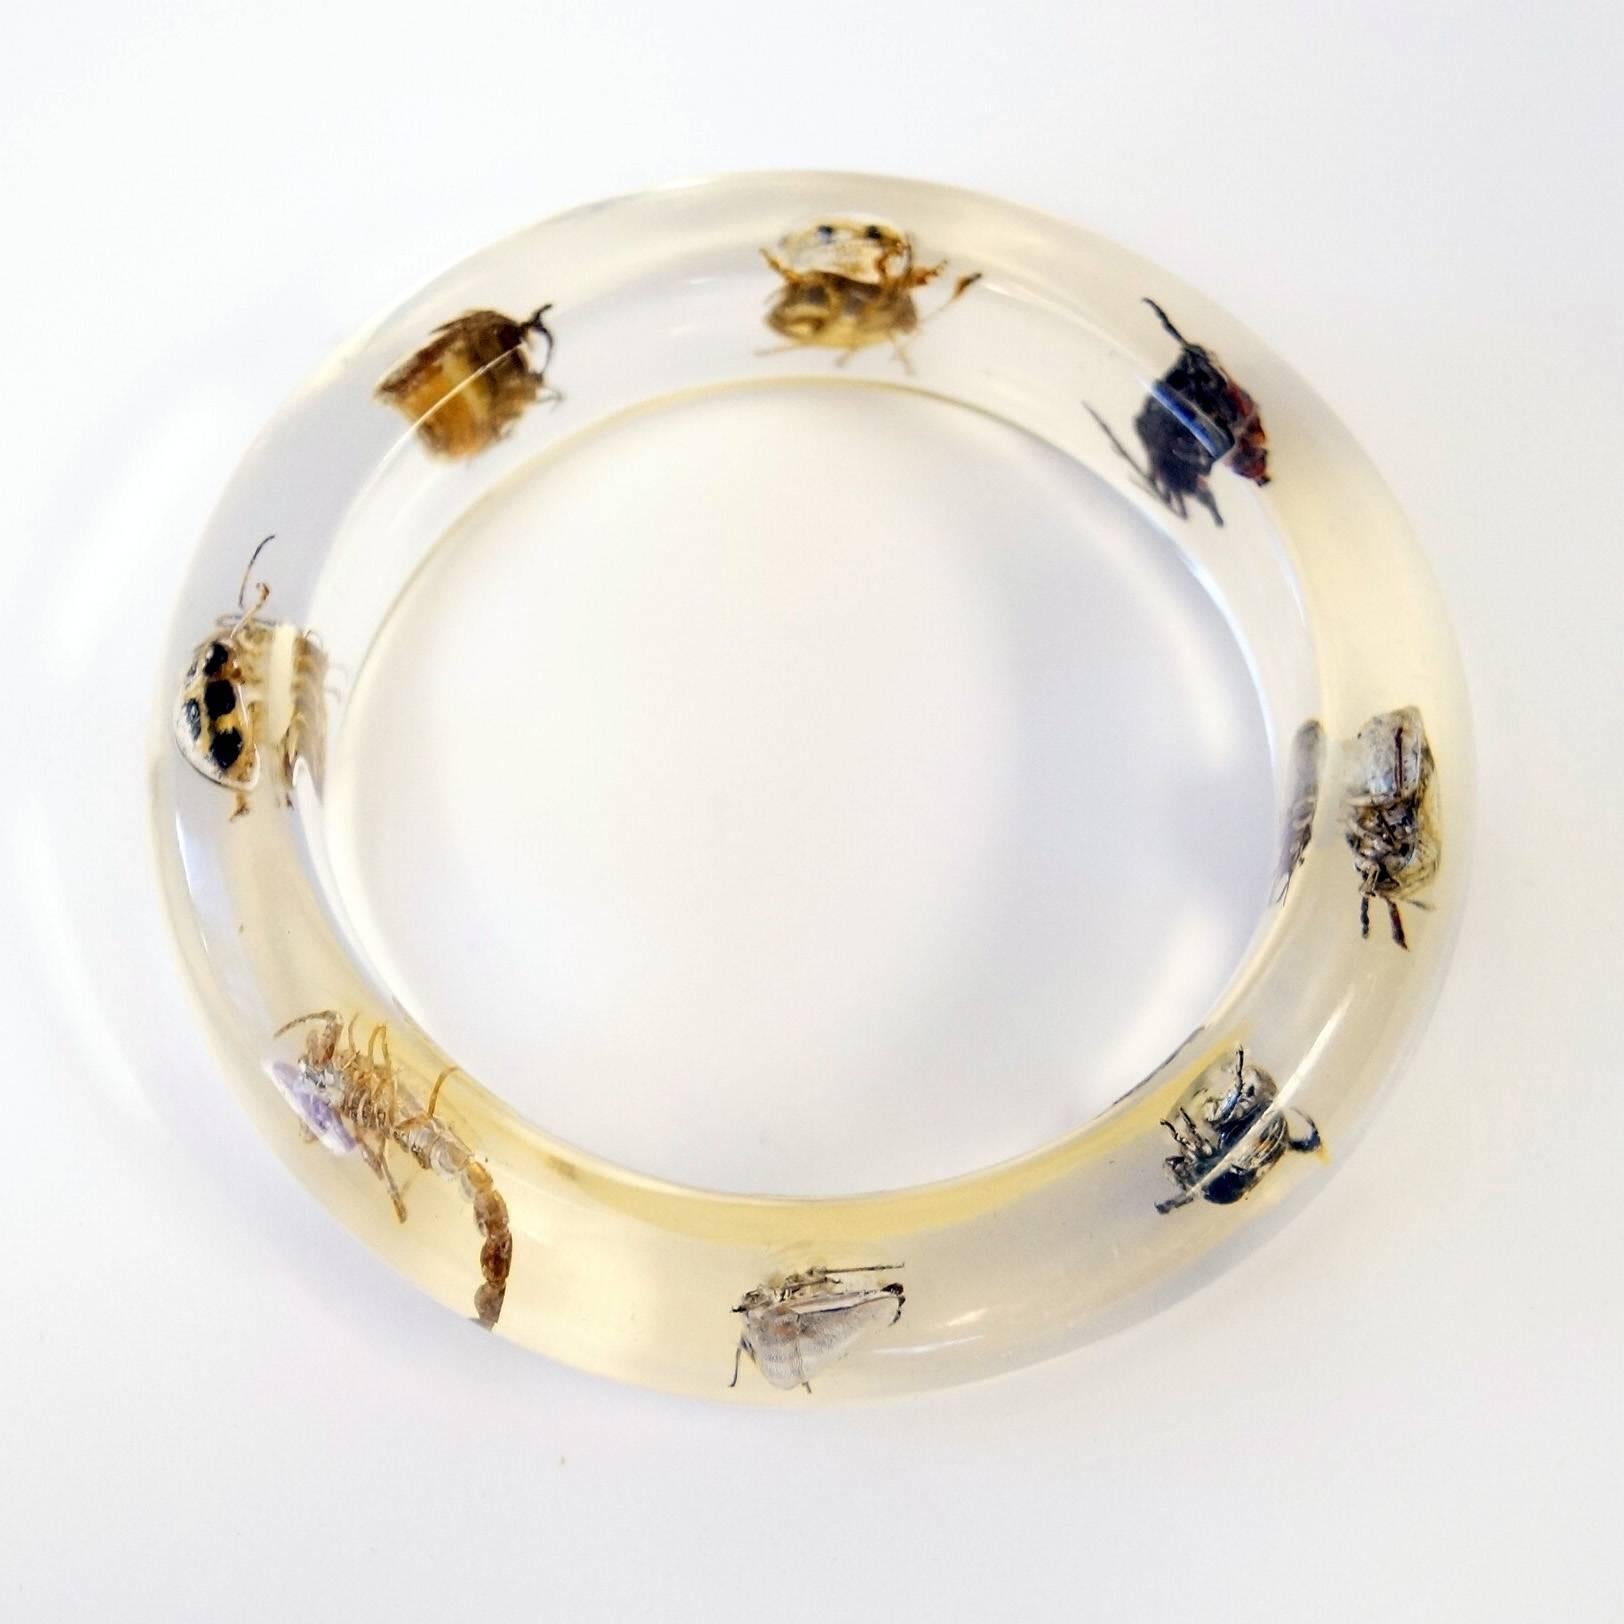 
Playful vintage lucite insect bangle! The bangle features seven different insects and a single arachnid suspended in the center, including a squash lady beetle, and a halyomorpha halys. The eighth creature is a scorpion!  All the insects face